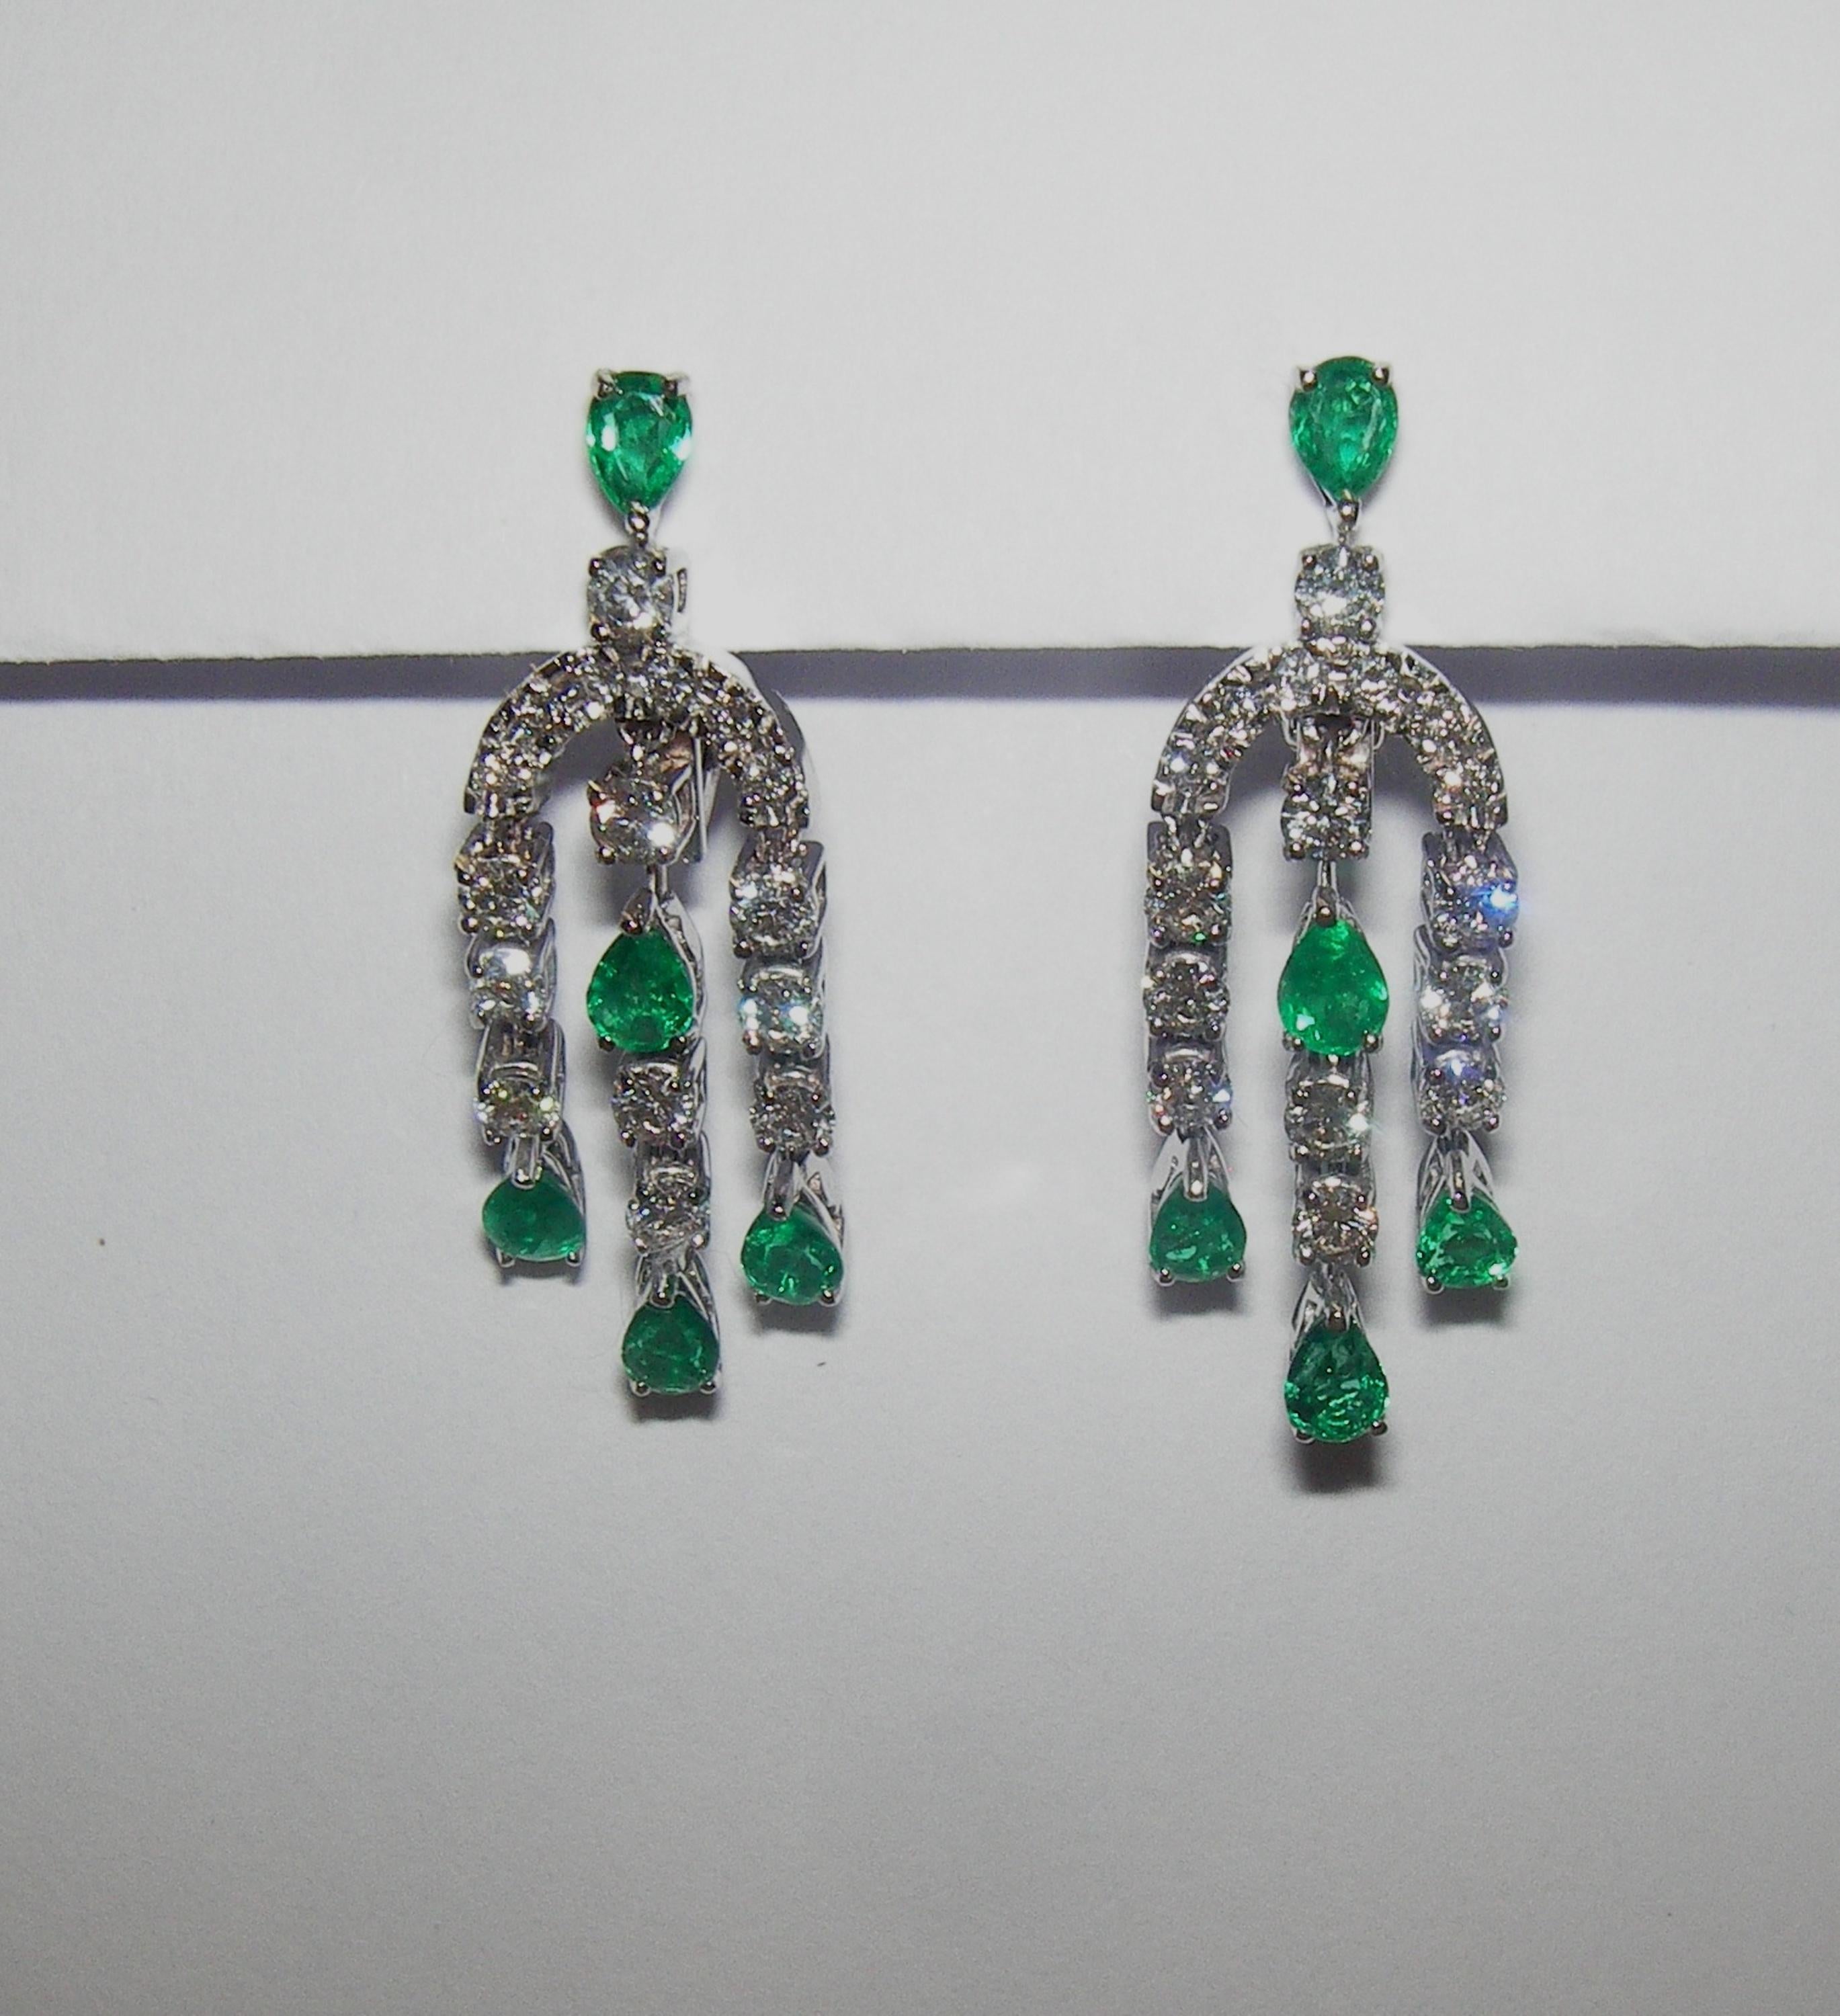 18 Karat White Gold Diamond and Emerald Dangle Earrings

32  Diamonds 1,30 Carat H SI
10 Emerald   1,28  Carat


Founded in 1974, Gianni Lazzaro is a family-owned jewelry company based out of Düsseldorf, Germany.
Although rooted in Germany, Gianni